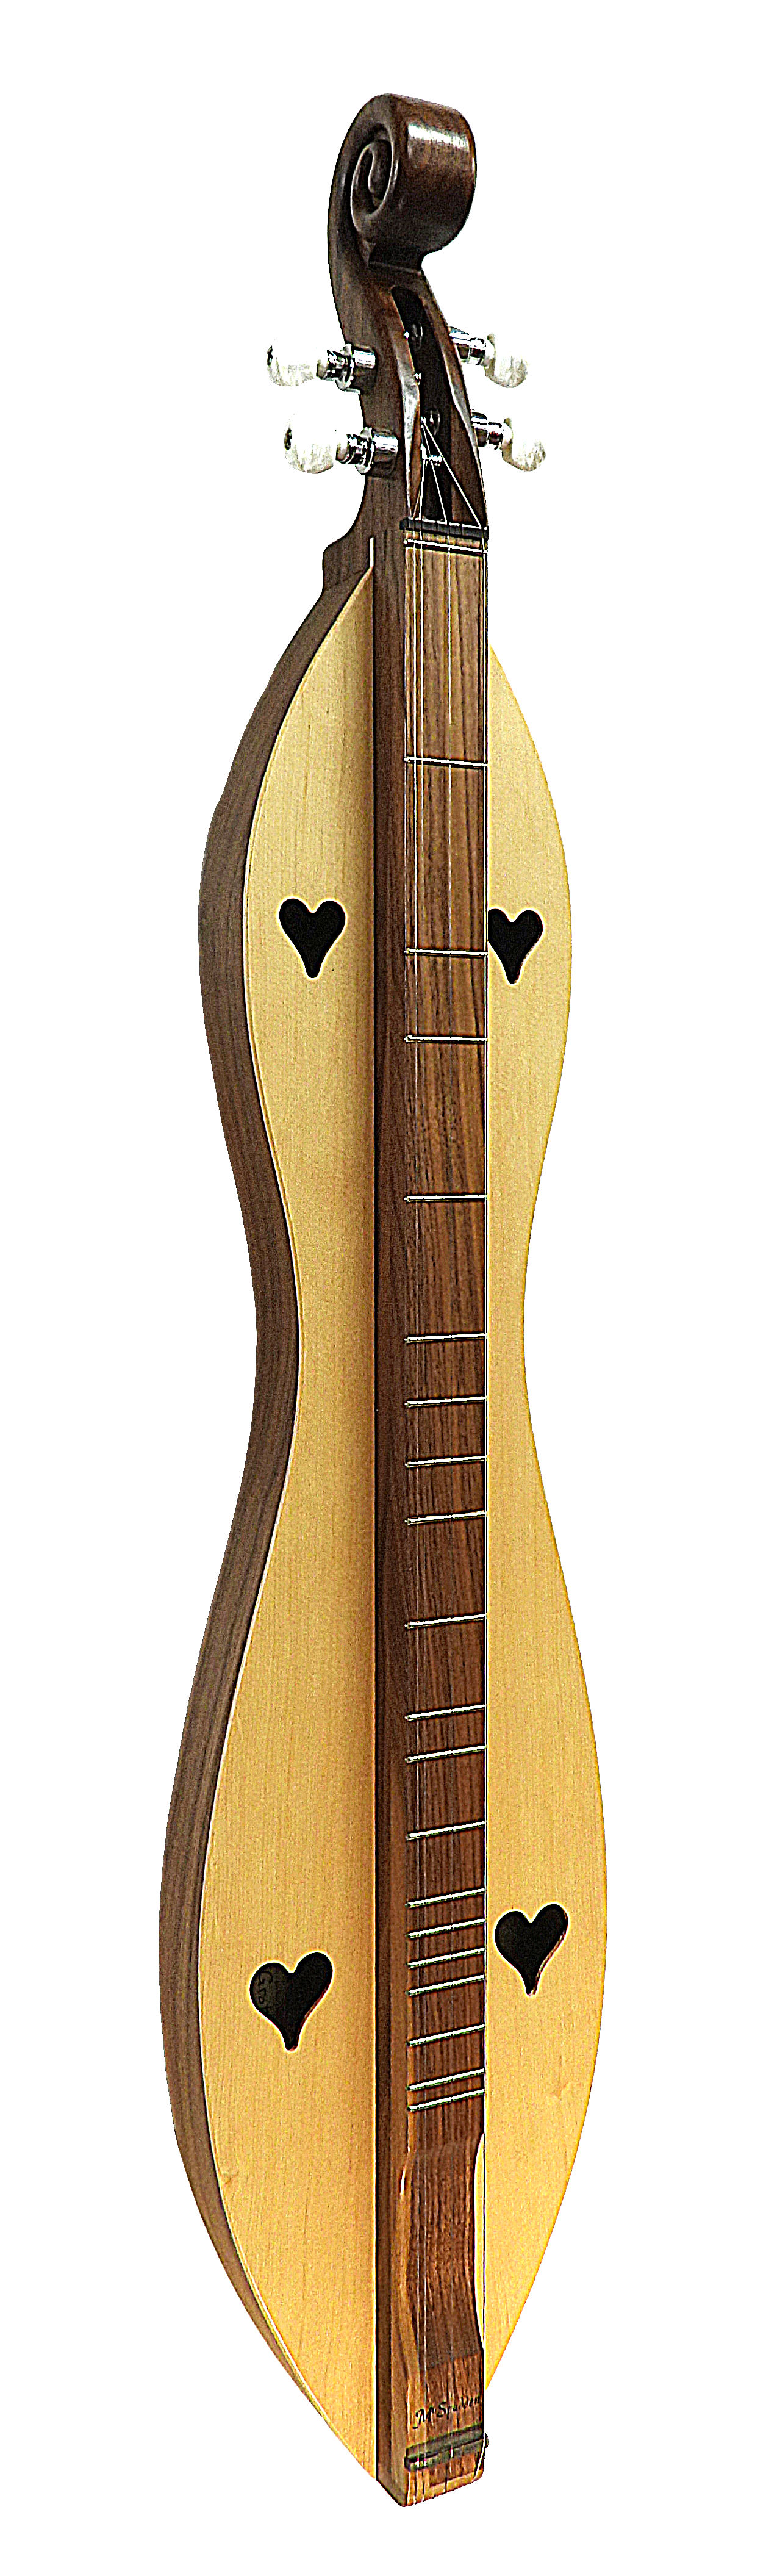 A 4 String, Scroll head, Hourglass with Walnut back and sides, Spruce top lute with a bird on it, featuring strap buttons for easy handling.